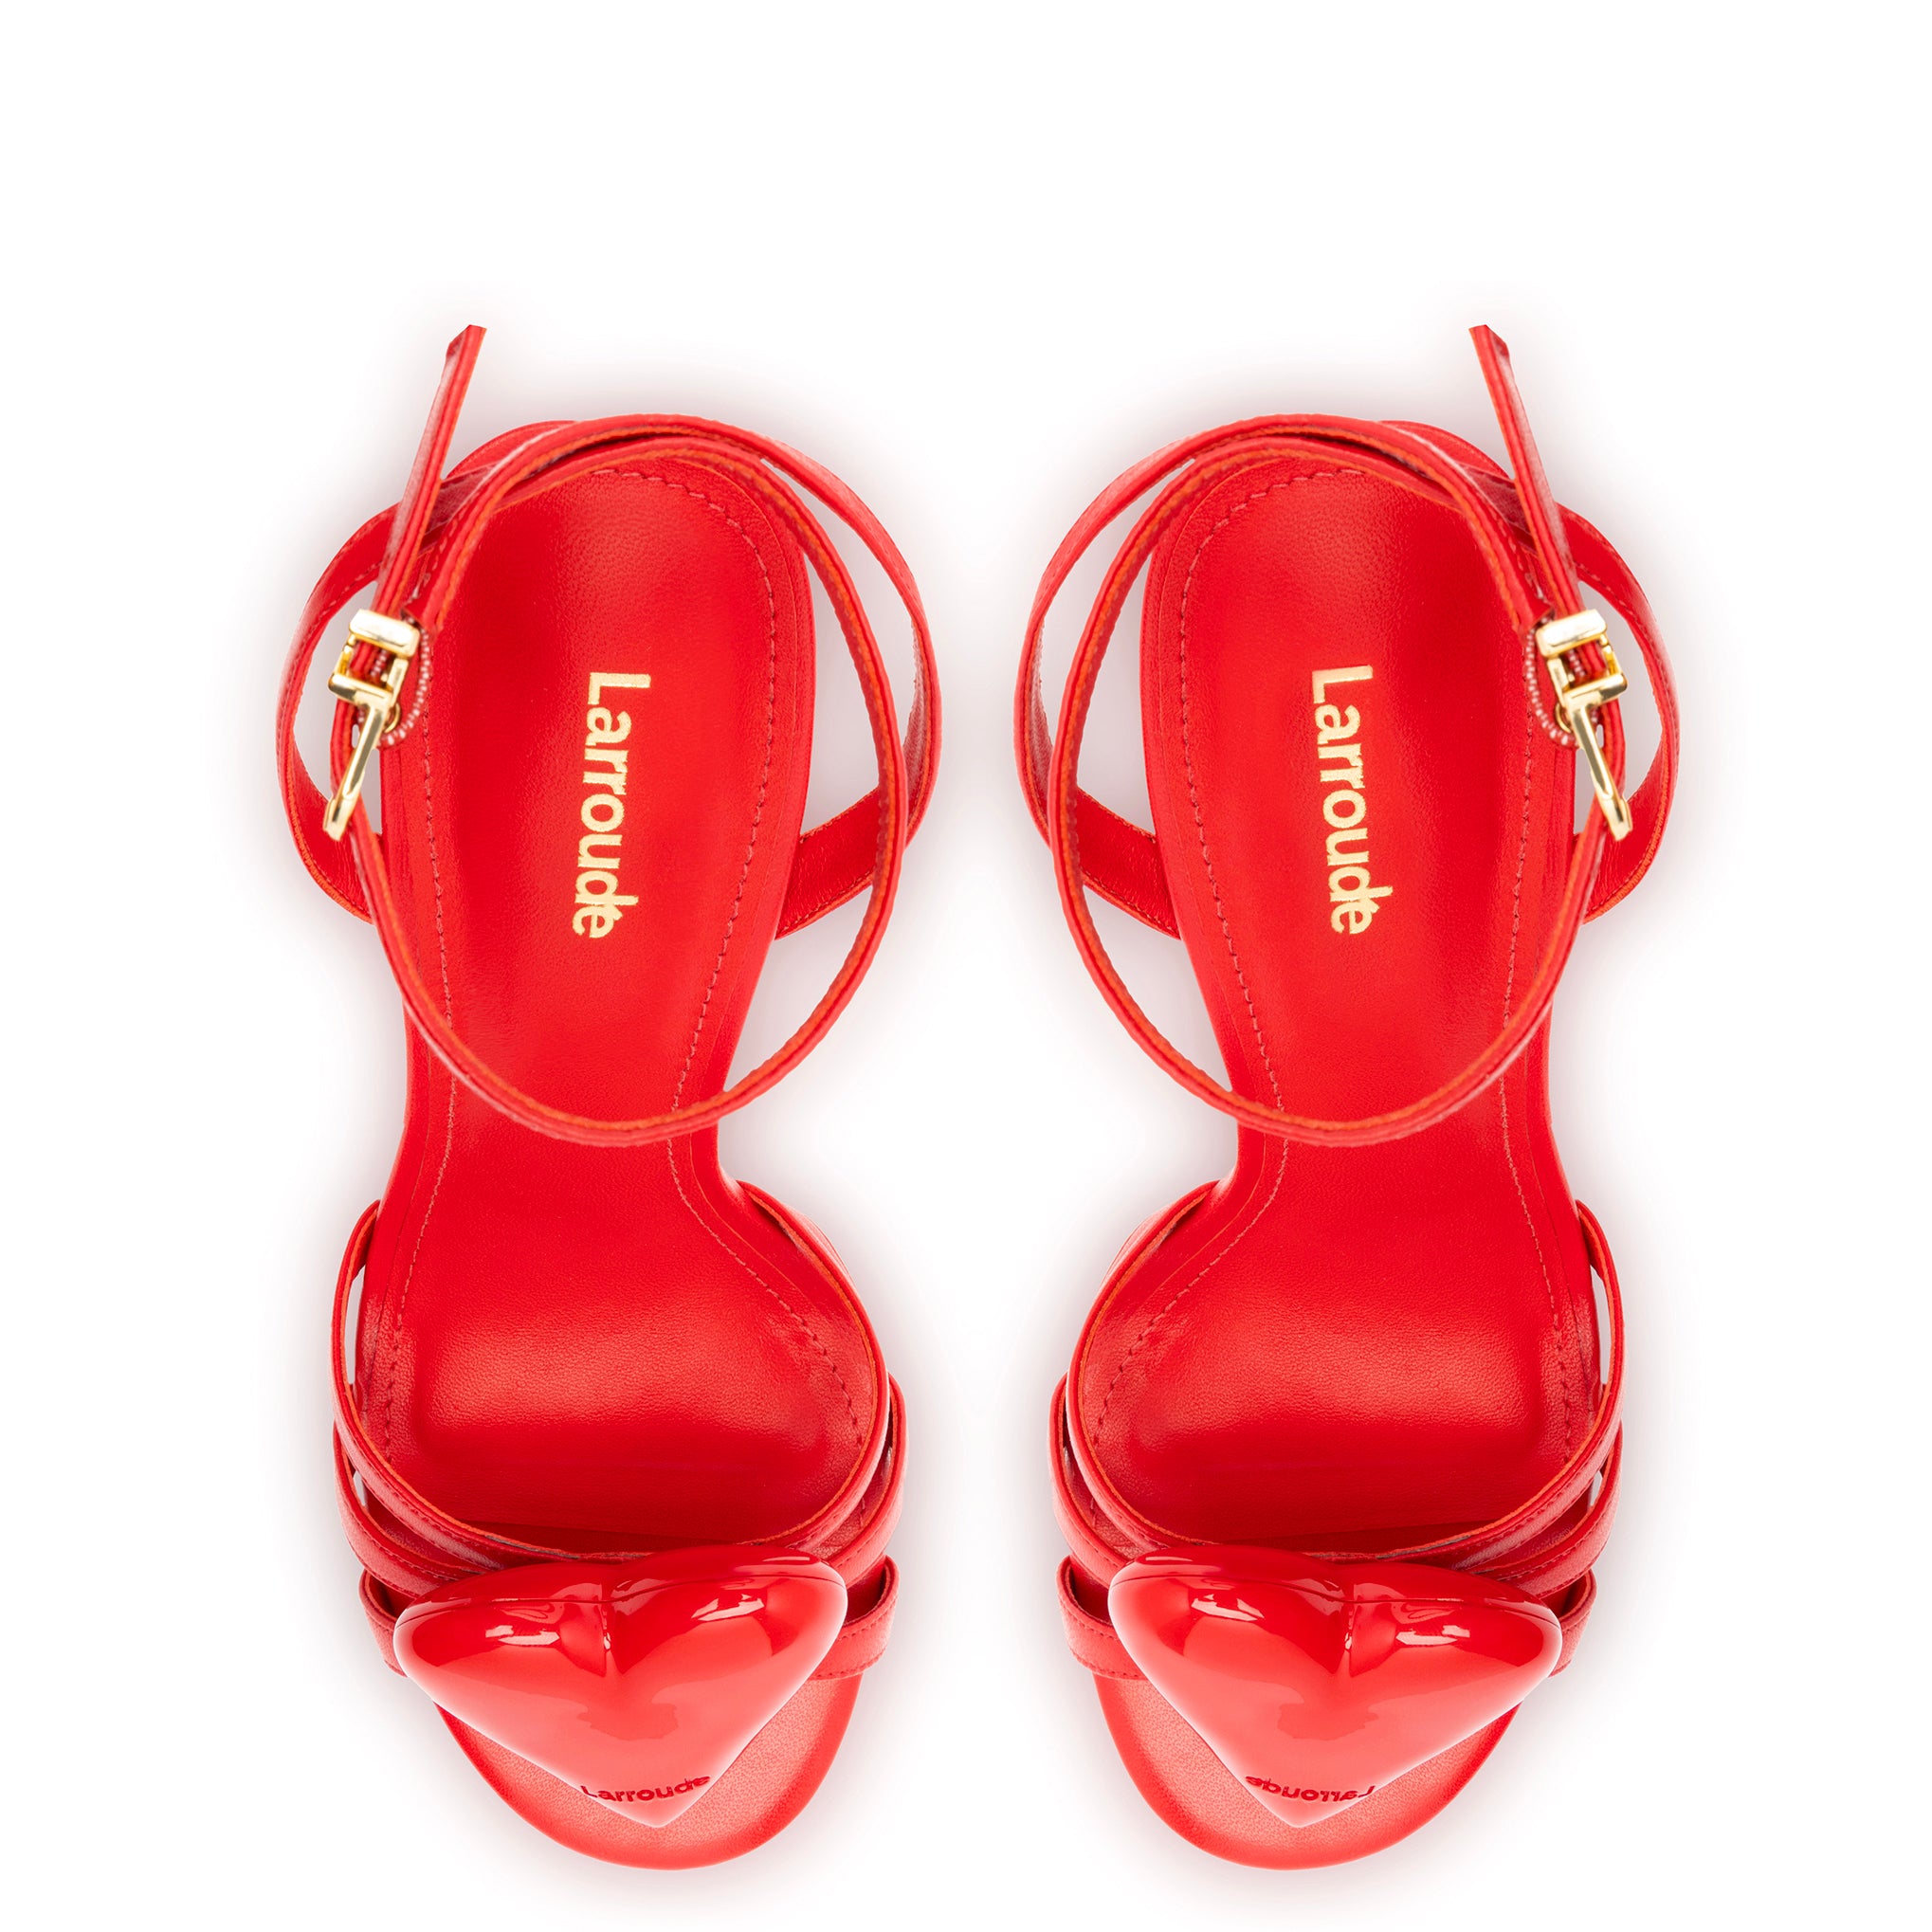 Amore Sandal in Scarlet Leather